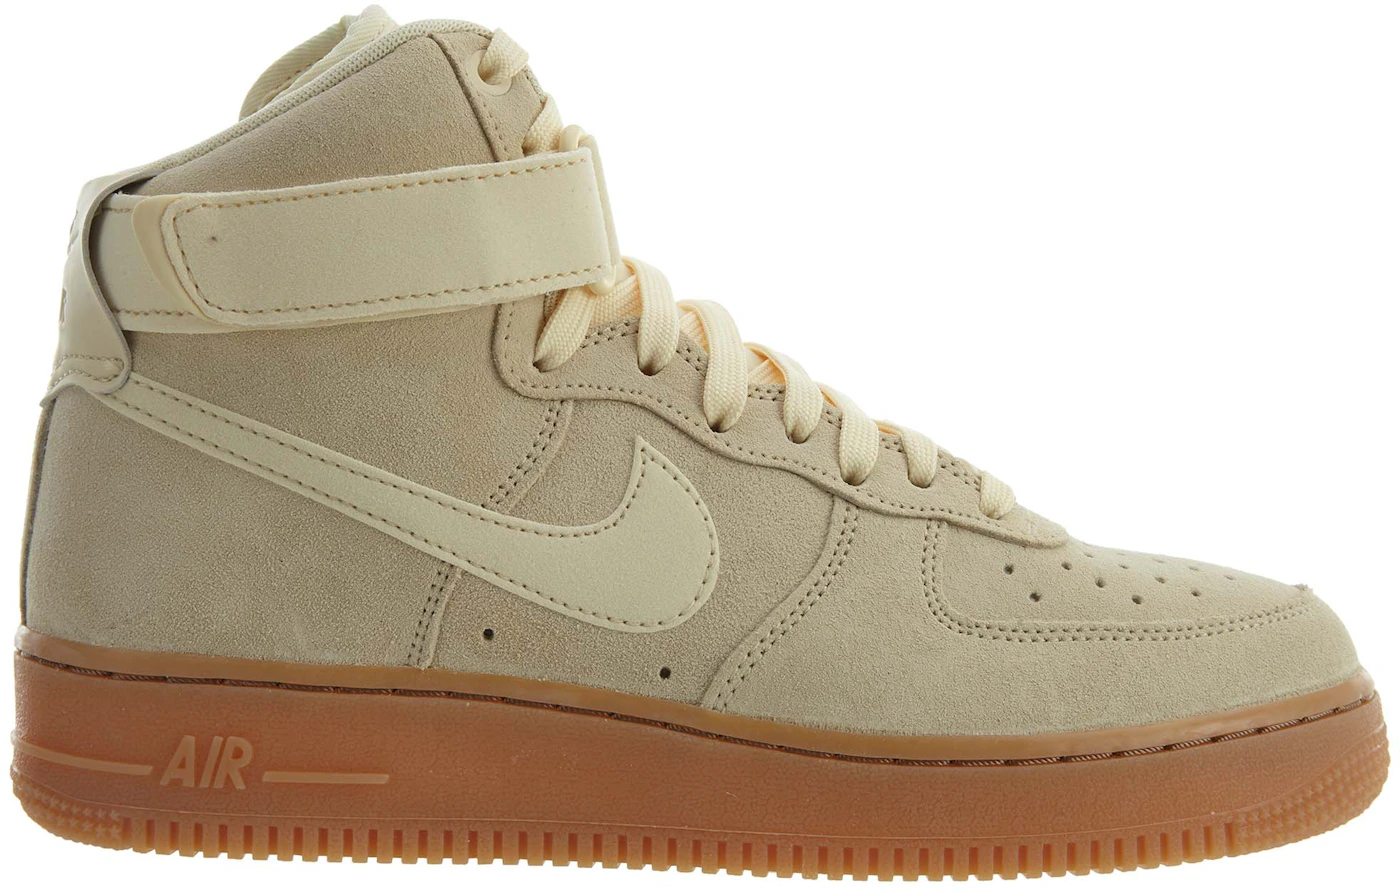 Men's Nike AF1 Air Force 1 High 07 LV8 AA1118-100 Suede Muslin - SIZE  17 